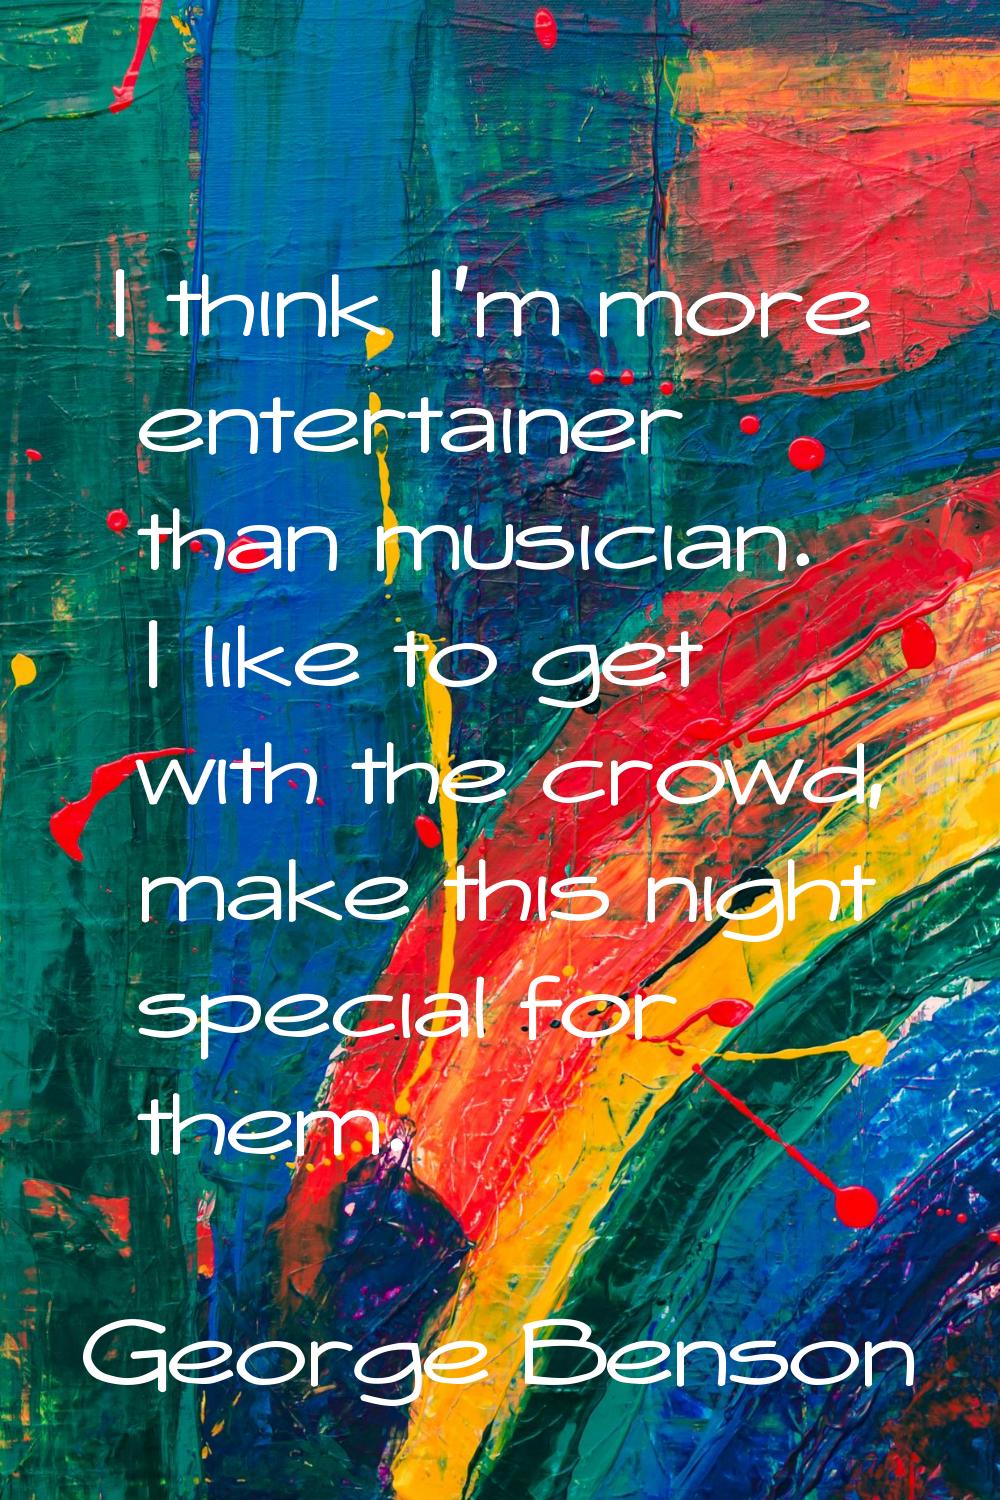 I think I'm more entertainer than musician. I like to get with the crowd, make this night special f